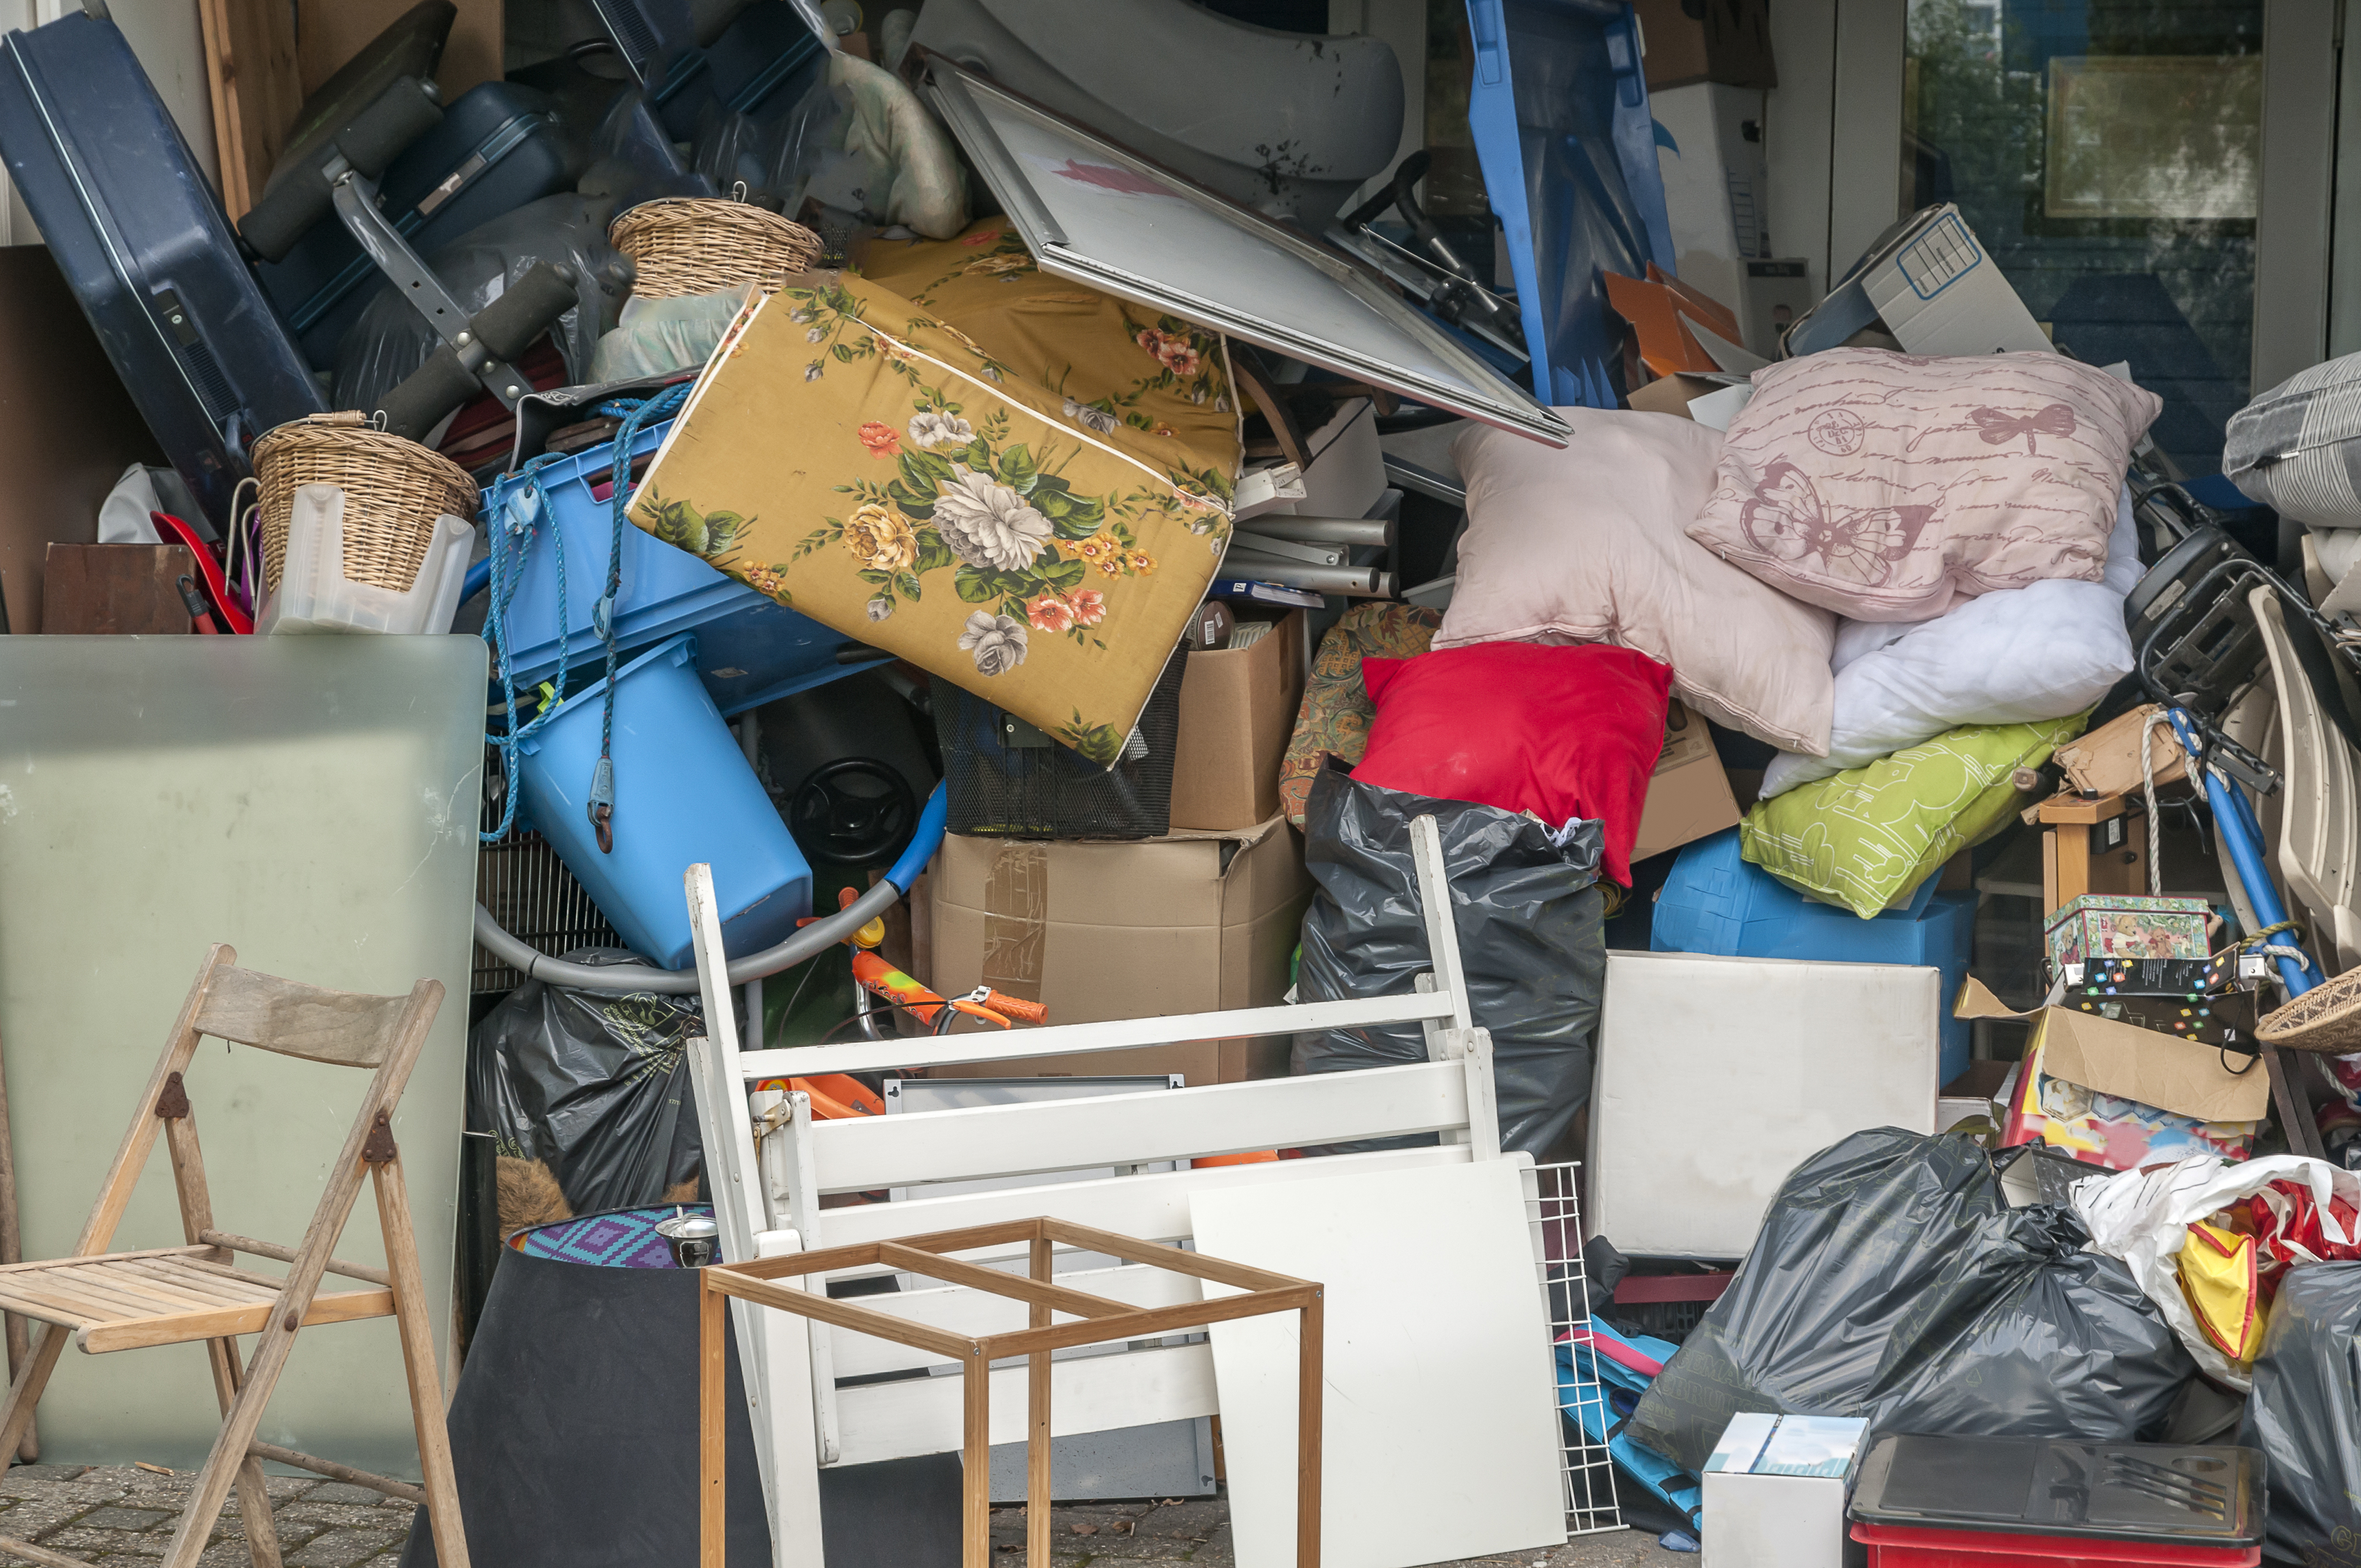 A cluttered space filled with assorted discarded items such as furniture and household goods, overflowing from a room